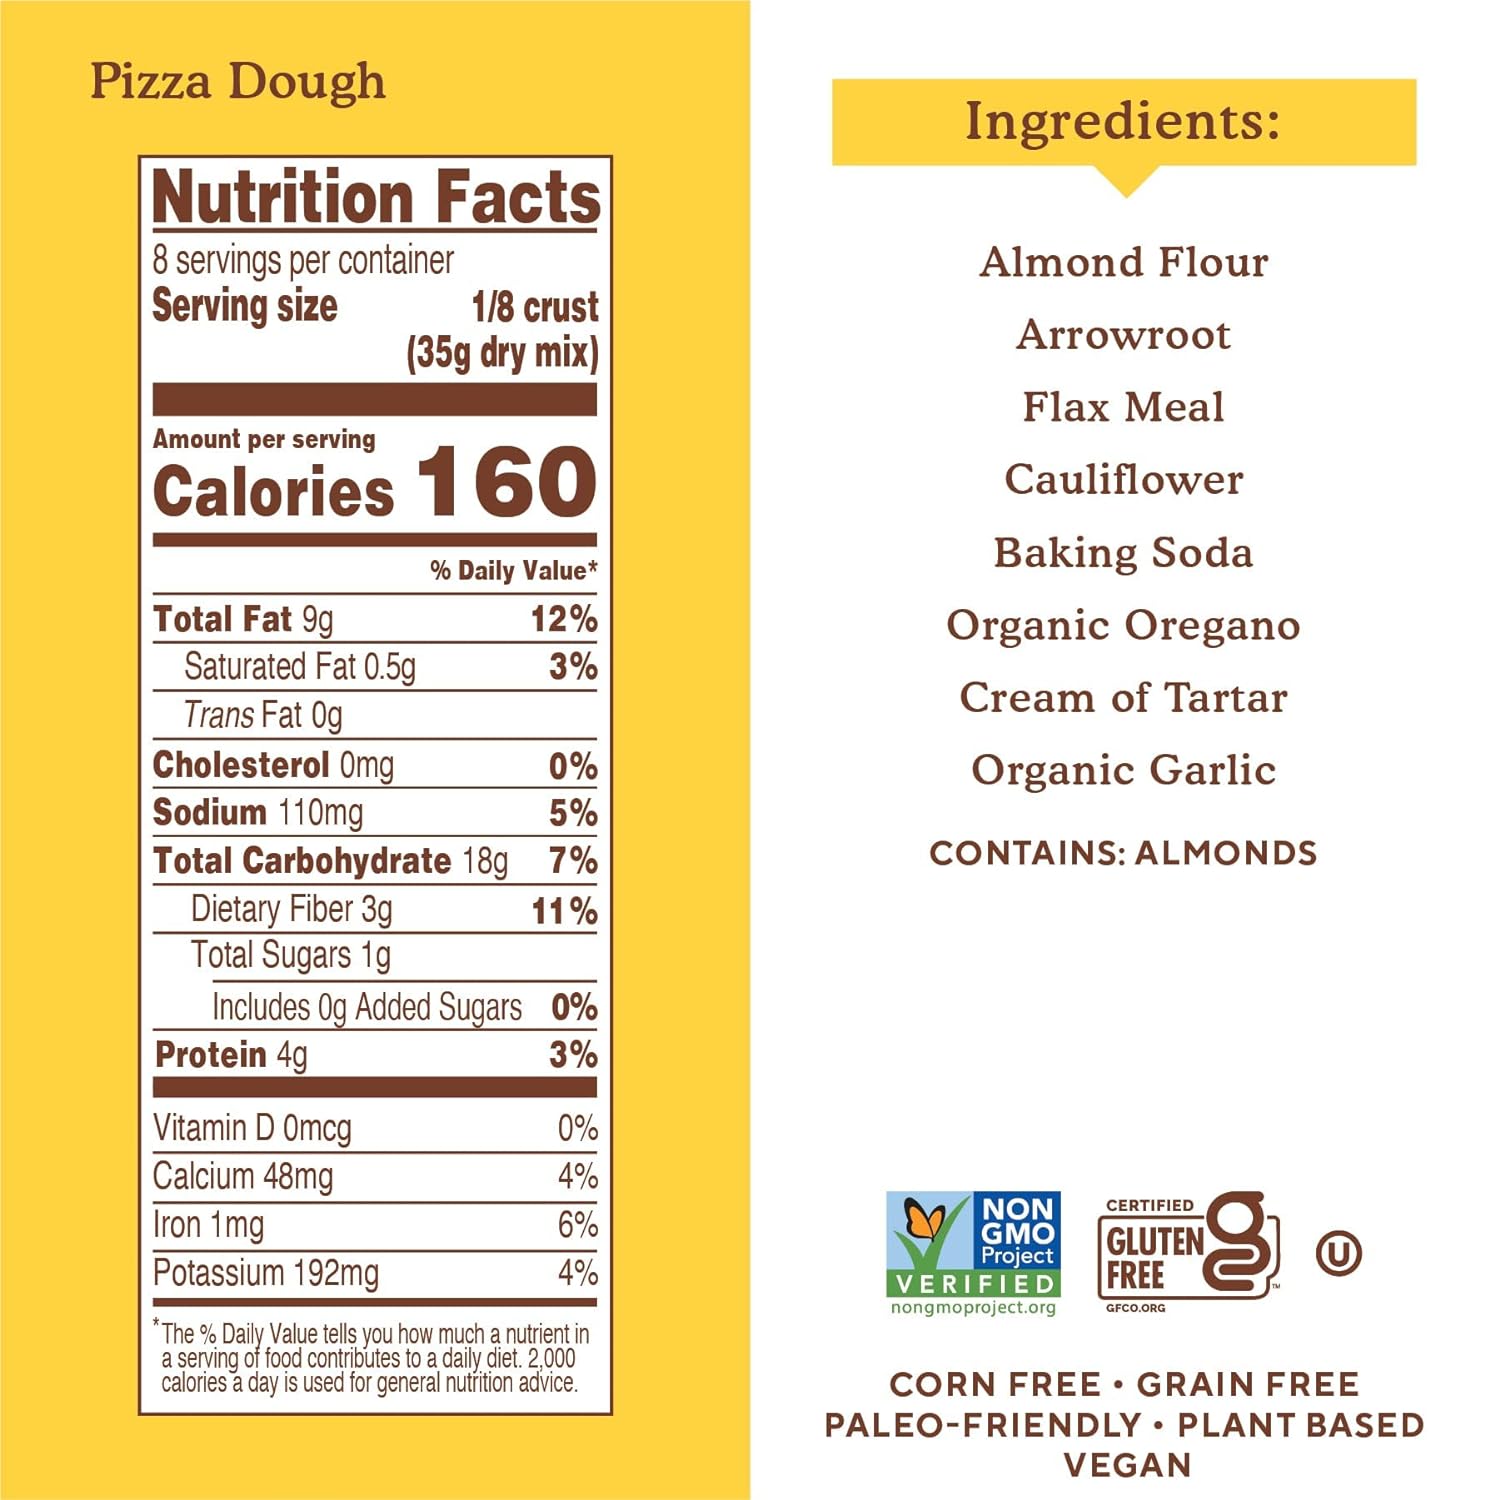 Simple Mills Almond Flour Baking Mix, Cauliflower Pizza Dough - Gluten Free, Vegan, Plant Based, 9.8 Ounce (Pack of 3) : Grocery & Gourmet Food